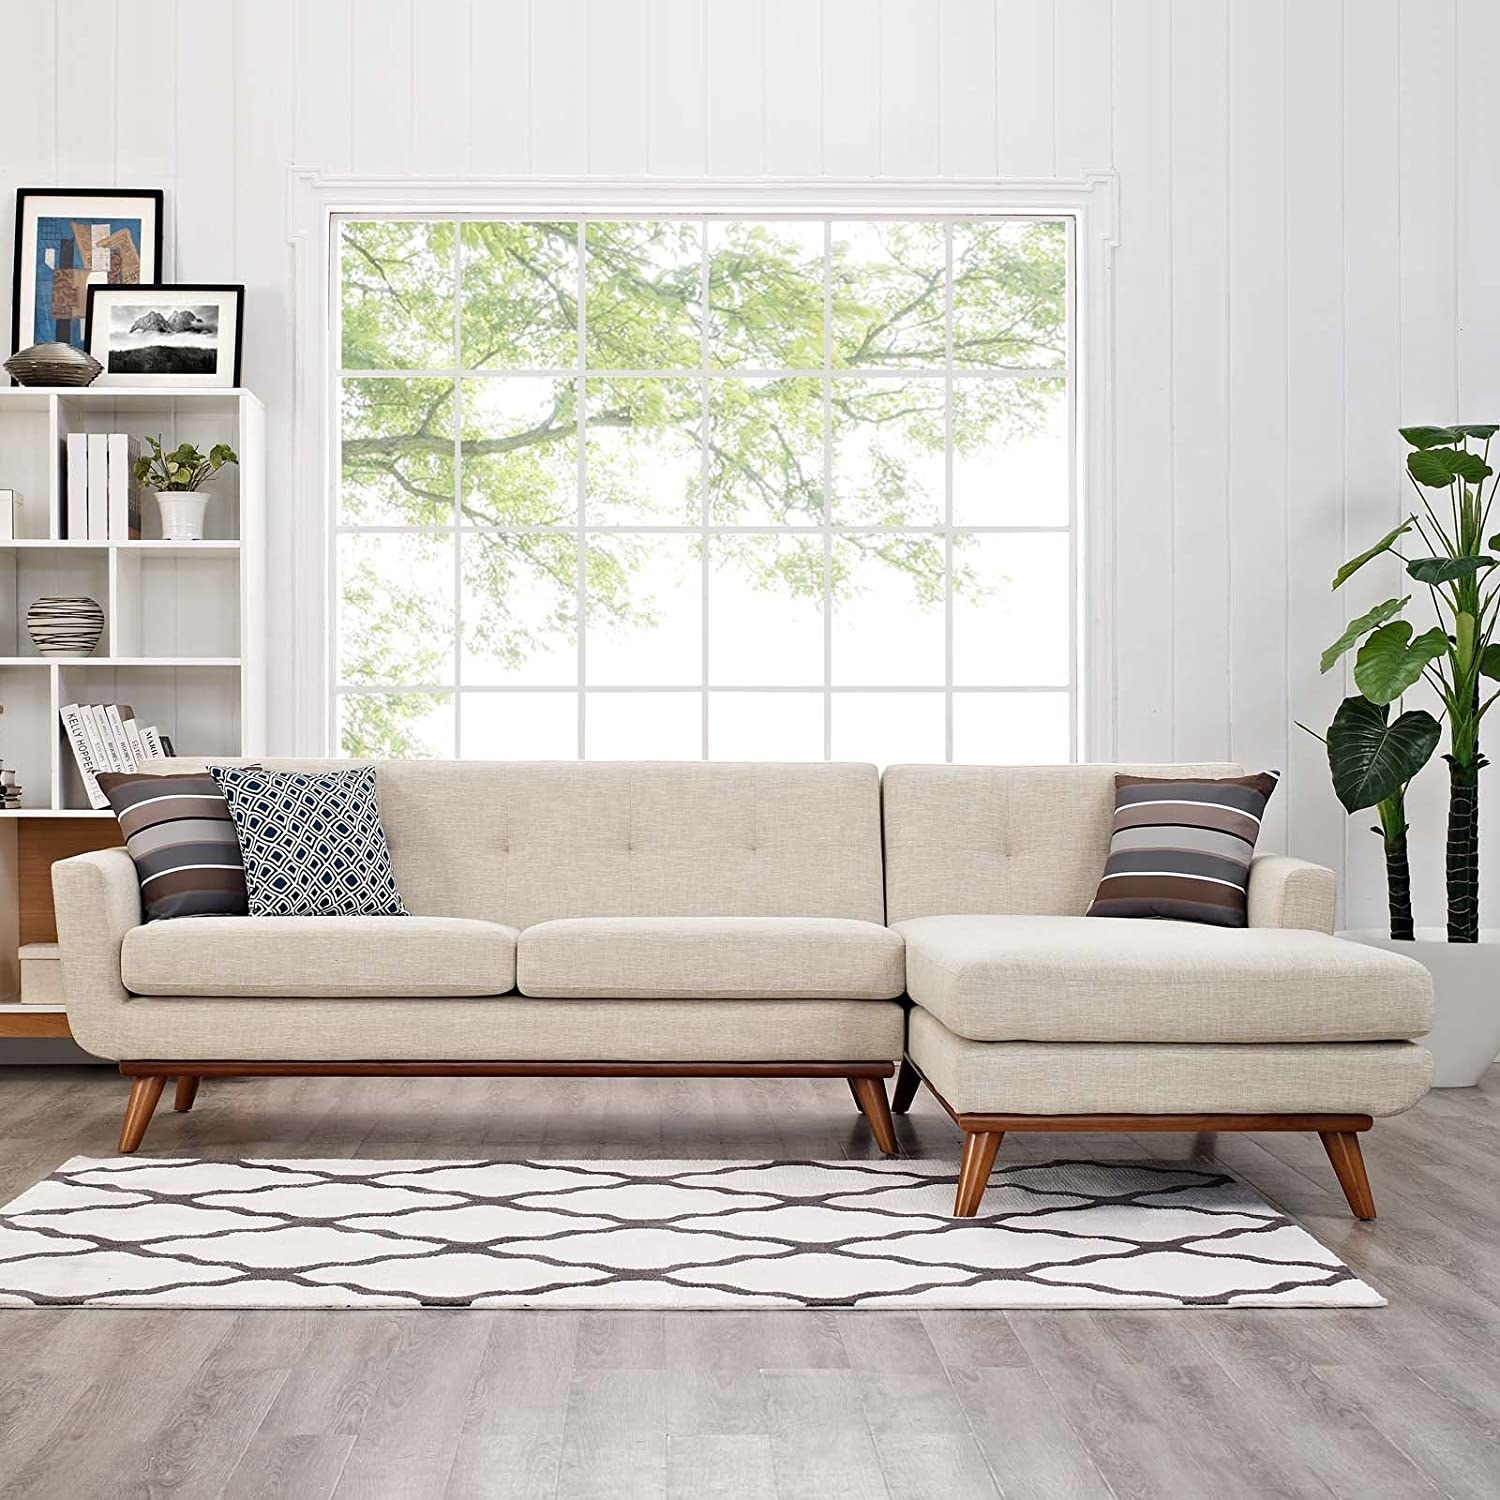 off-white mid-century modern sectional with wood legs